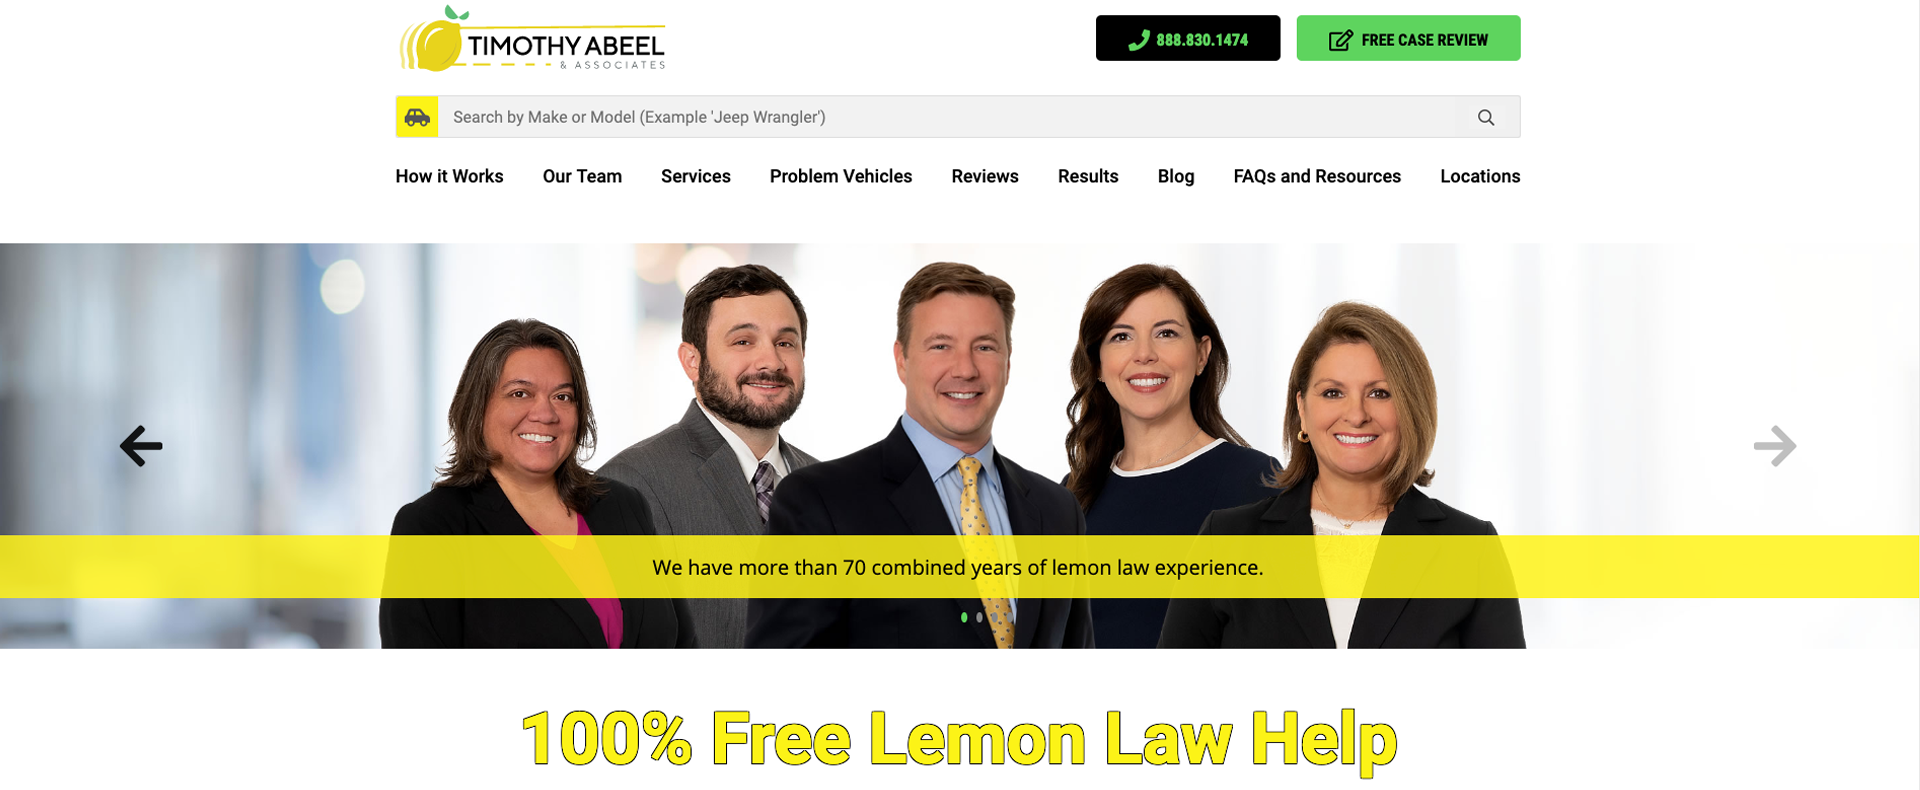 Abeel Homepage After